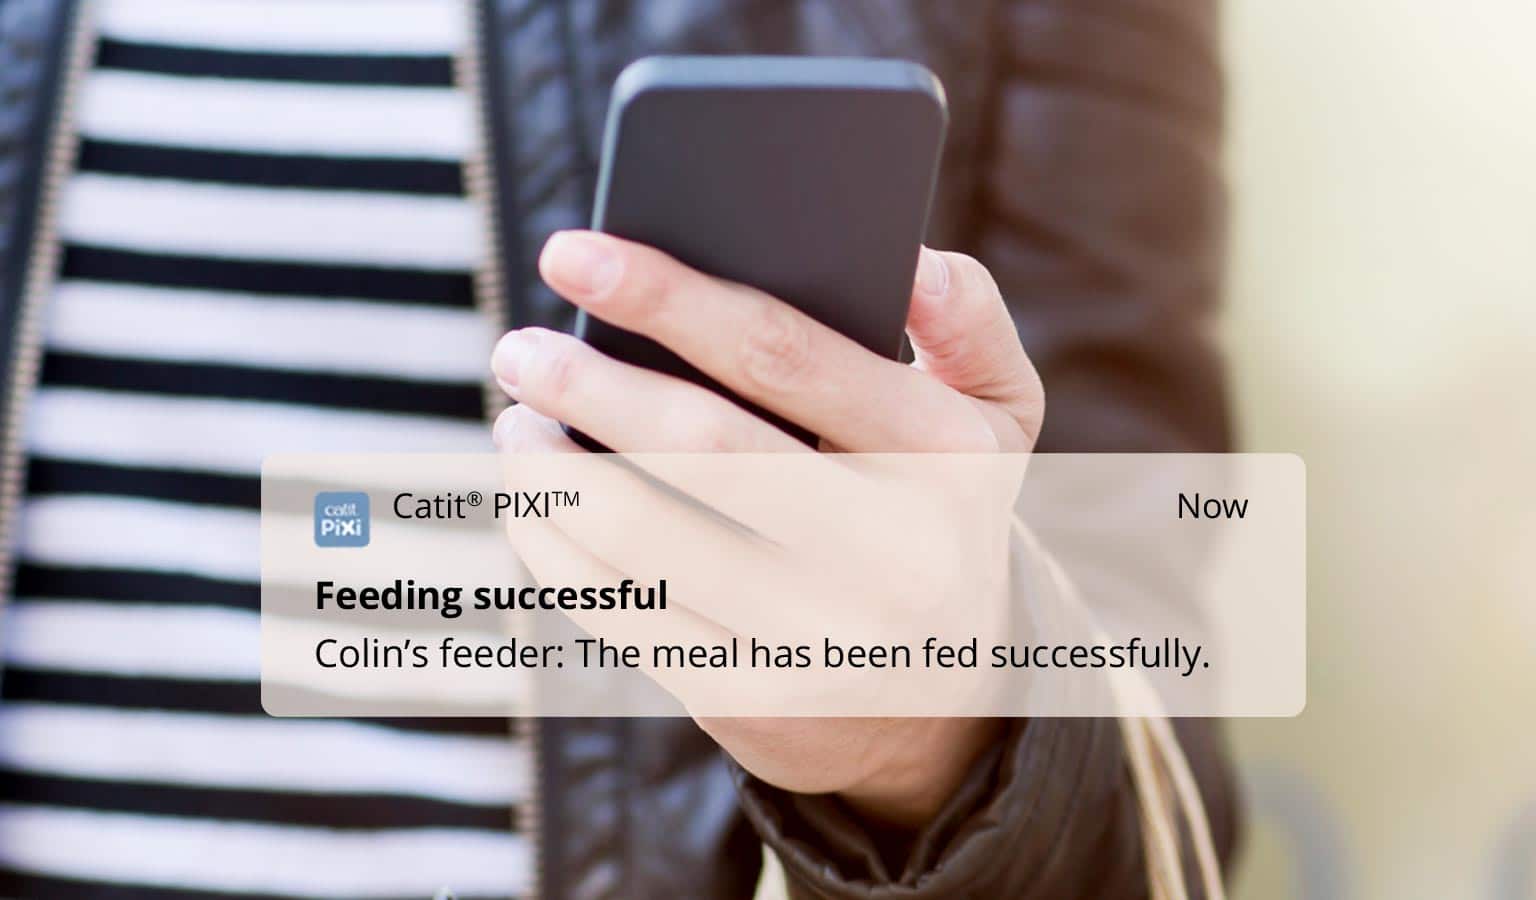 Get notified when food is running out